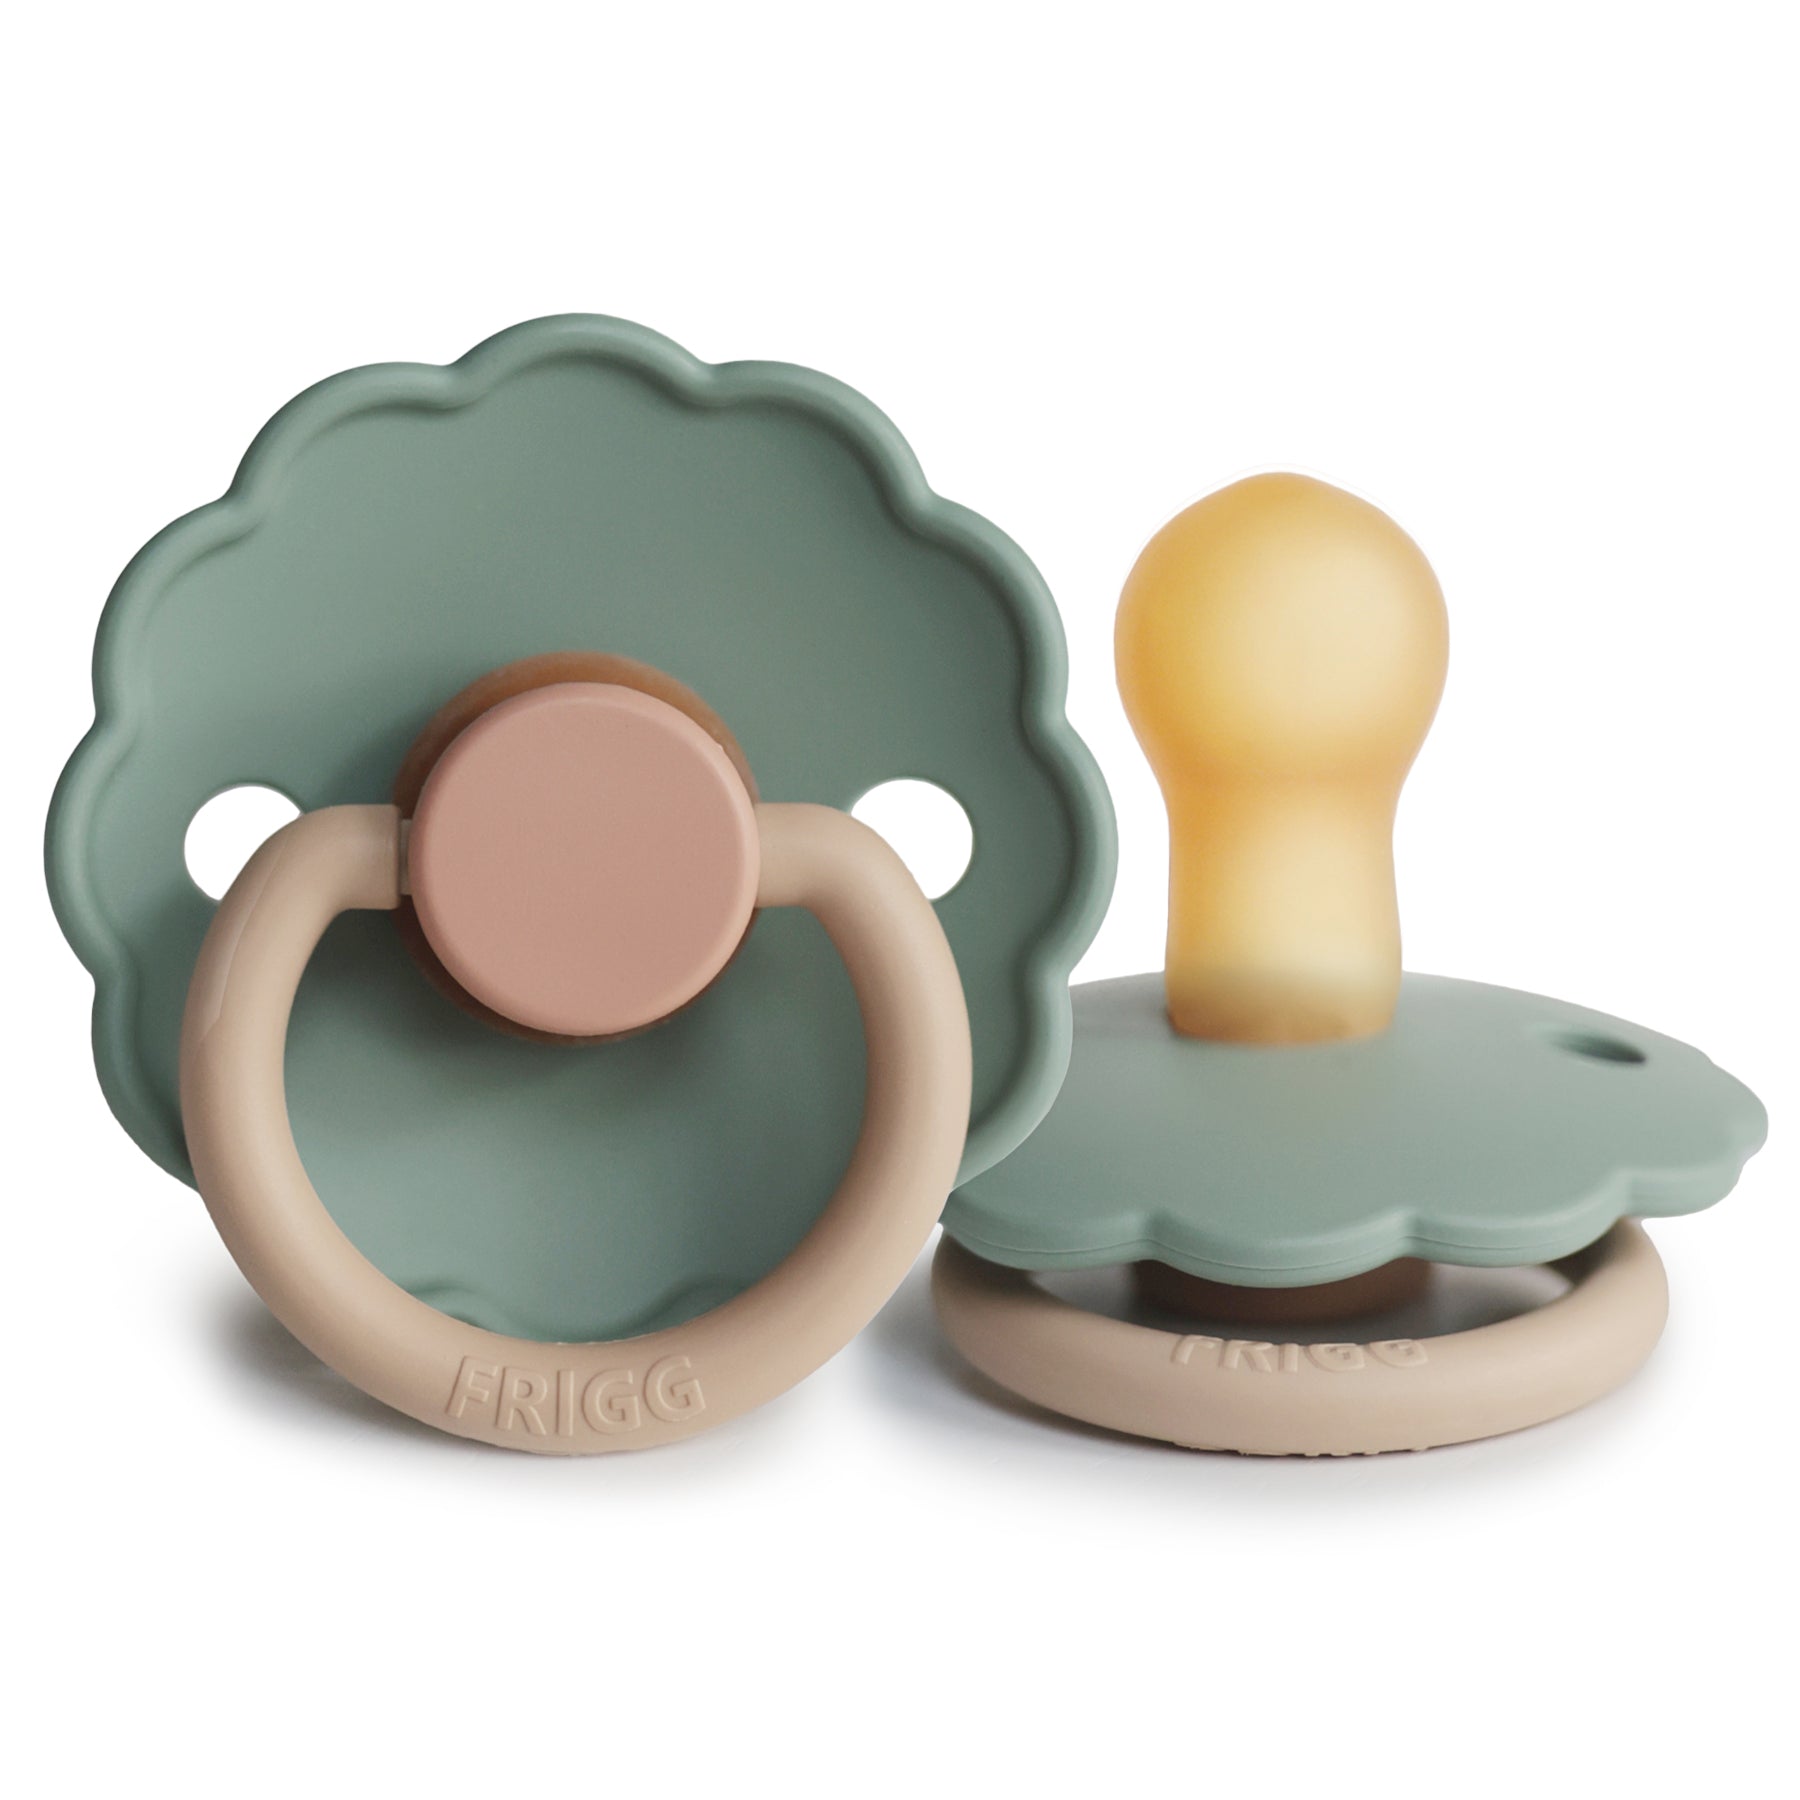 FRIGG Daisy Latex Pacifier Dummy – Willow